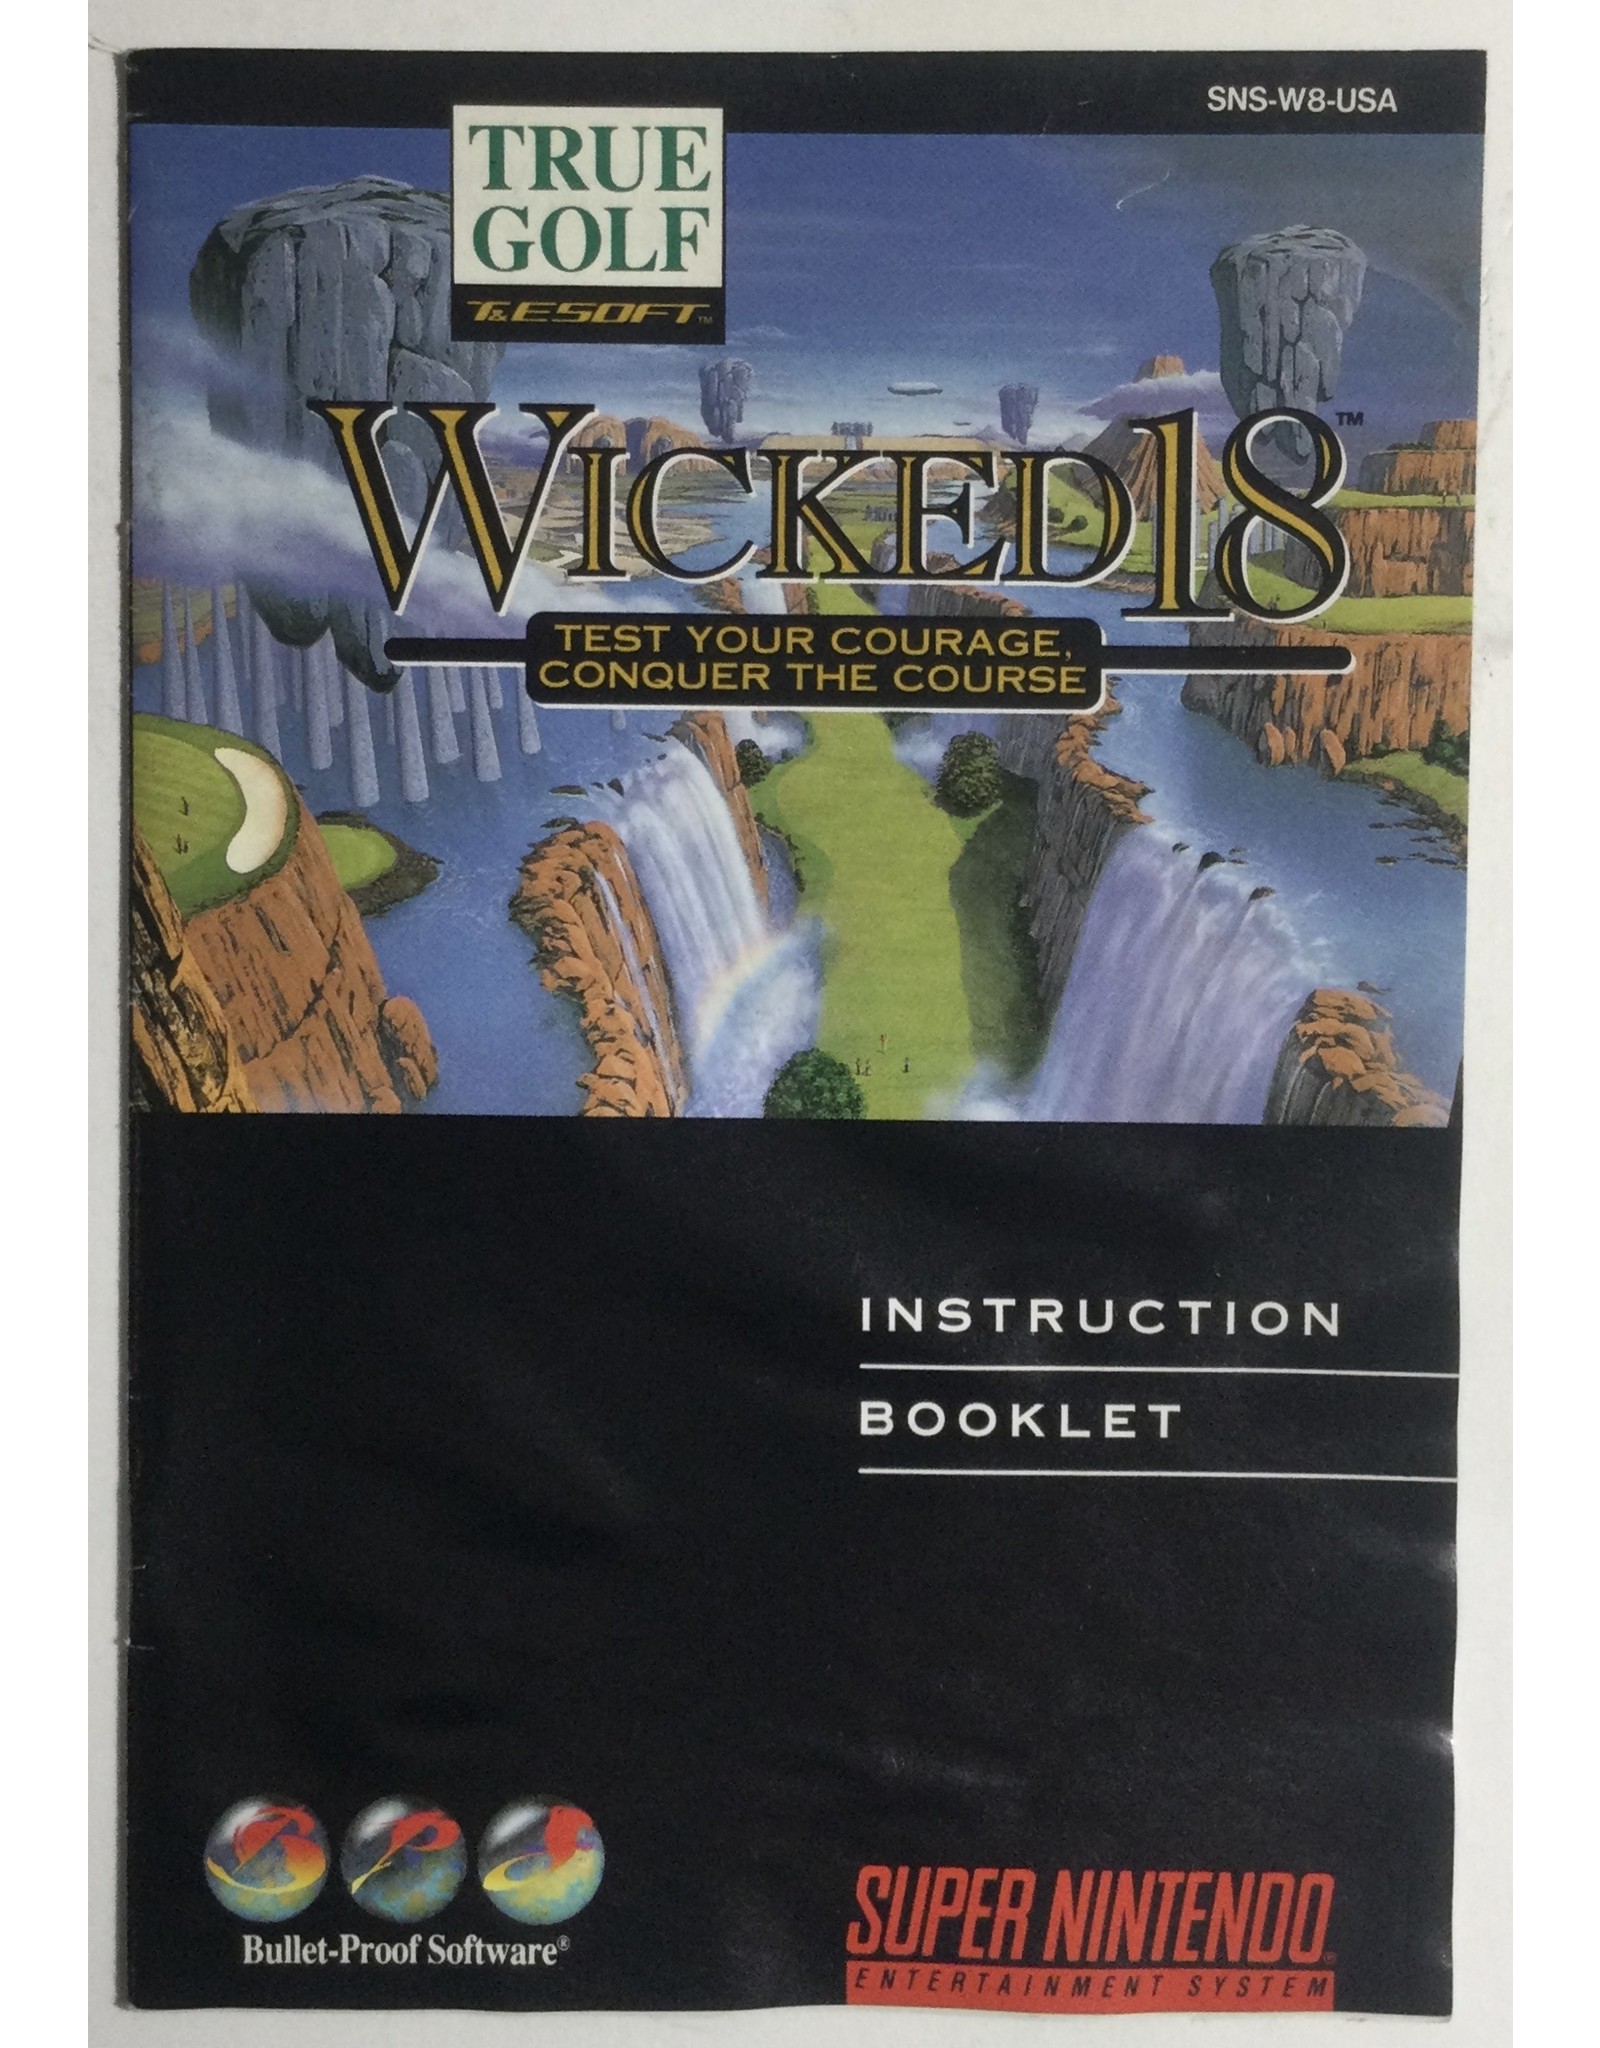 BULLET PROOF SOFTWARE Wicked18 for Super Nintendo Entertainment System (SNES)